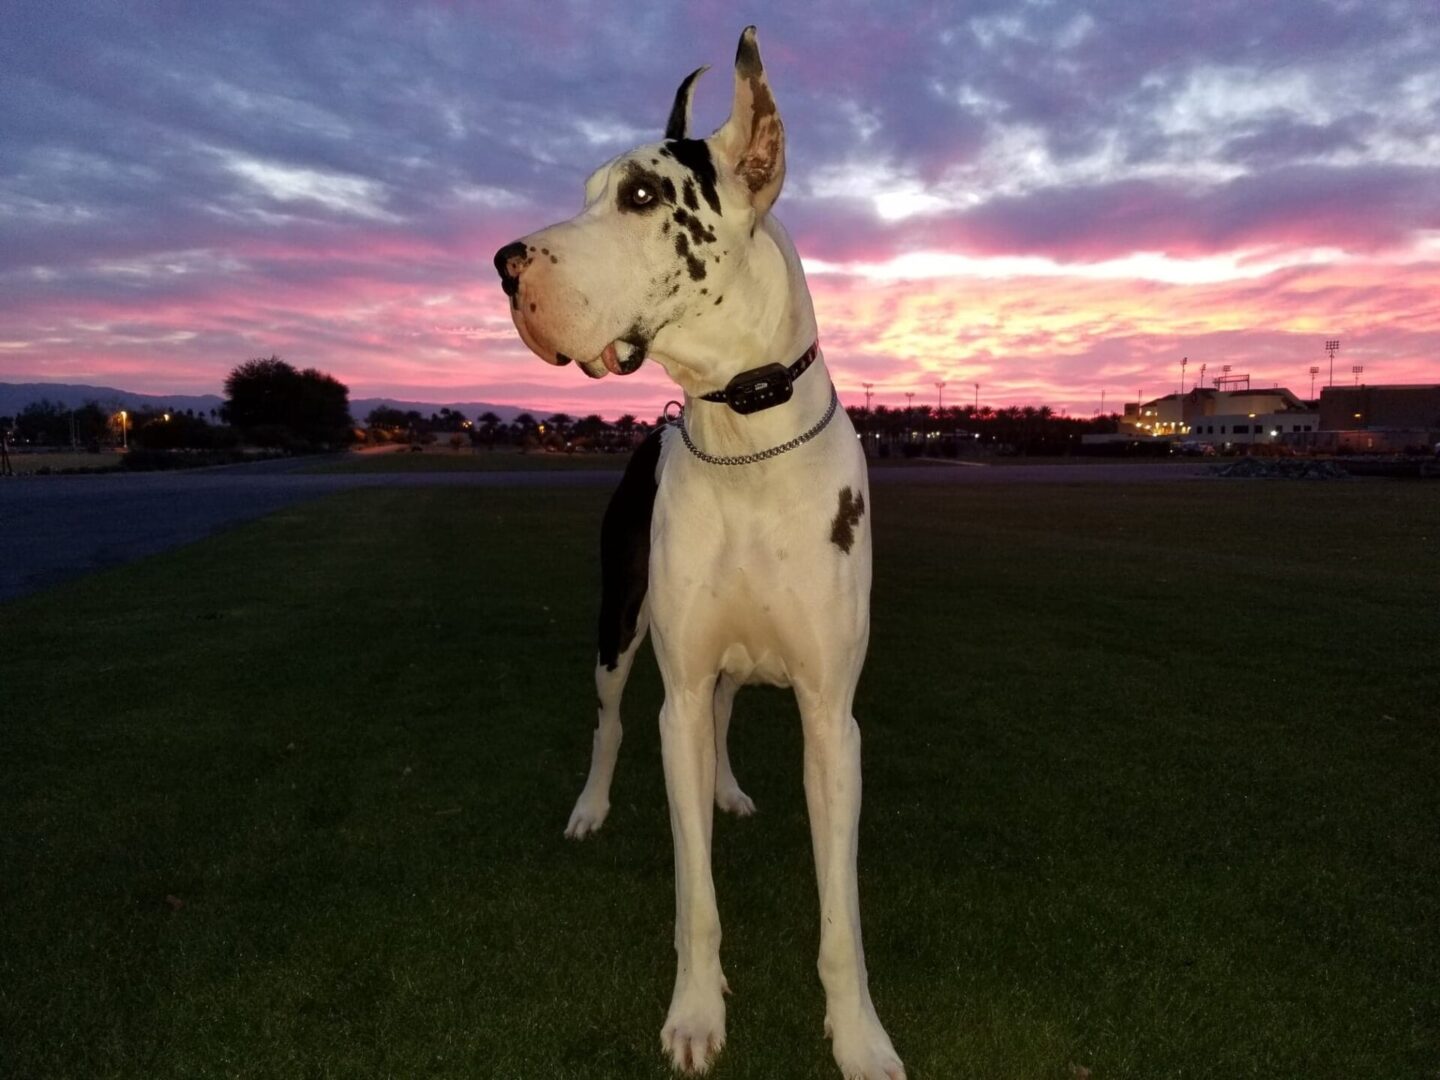 A dog standing in the grass at sunset.